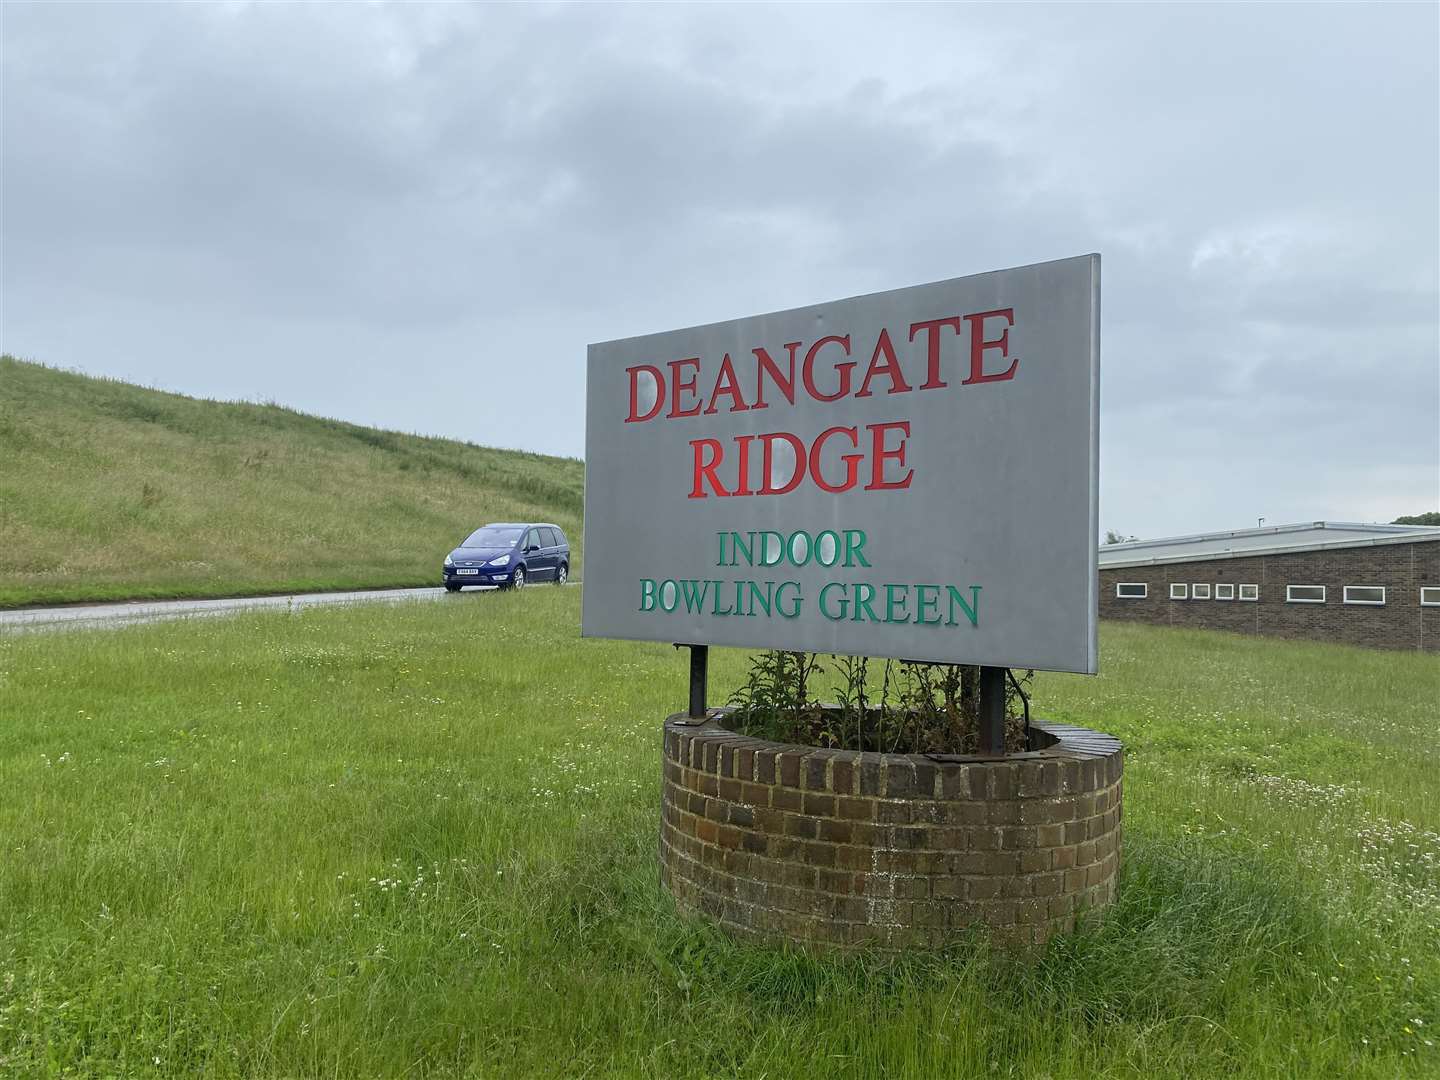 Land around the Deangate sports complex will be developed